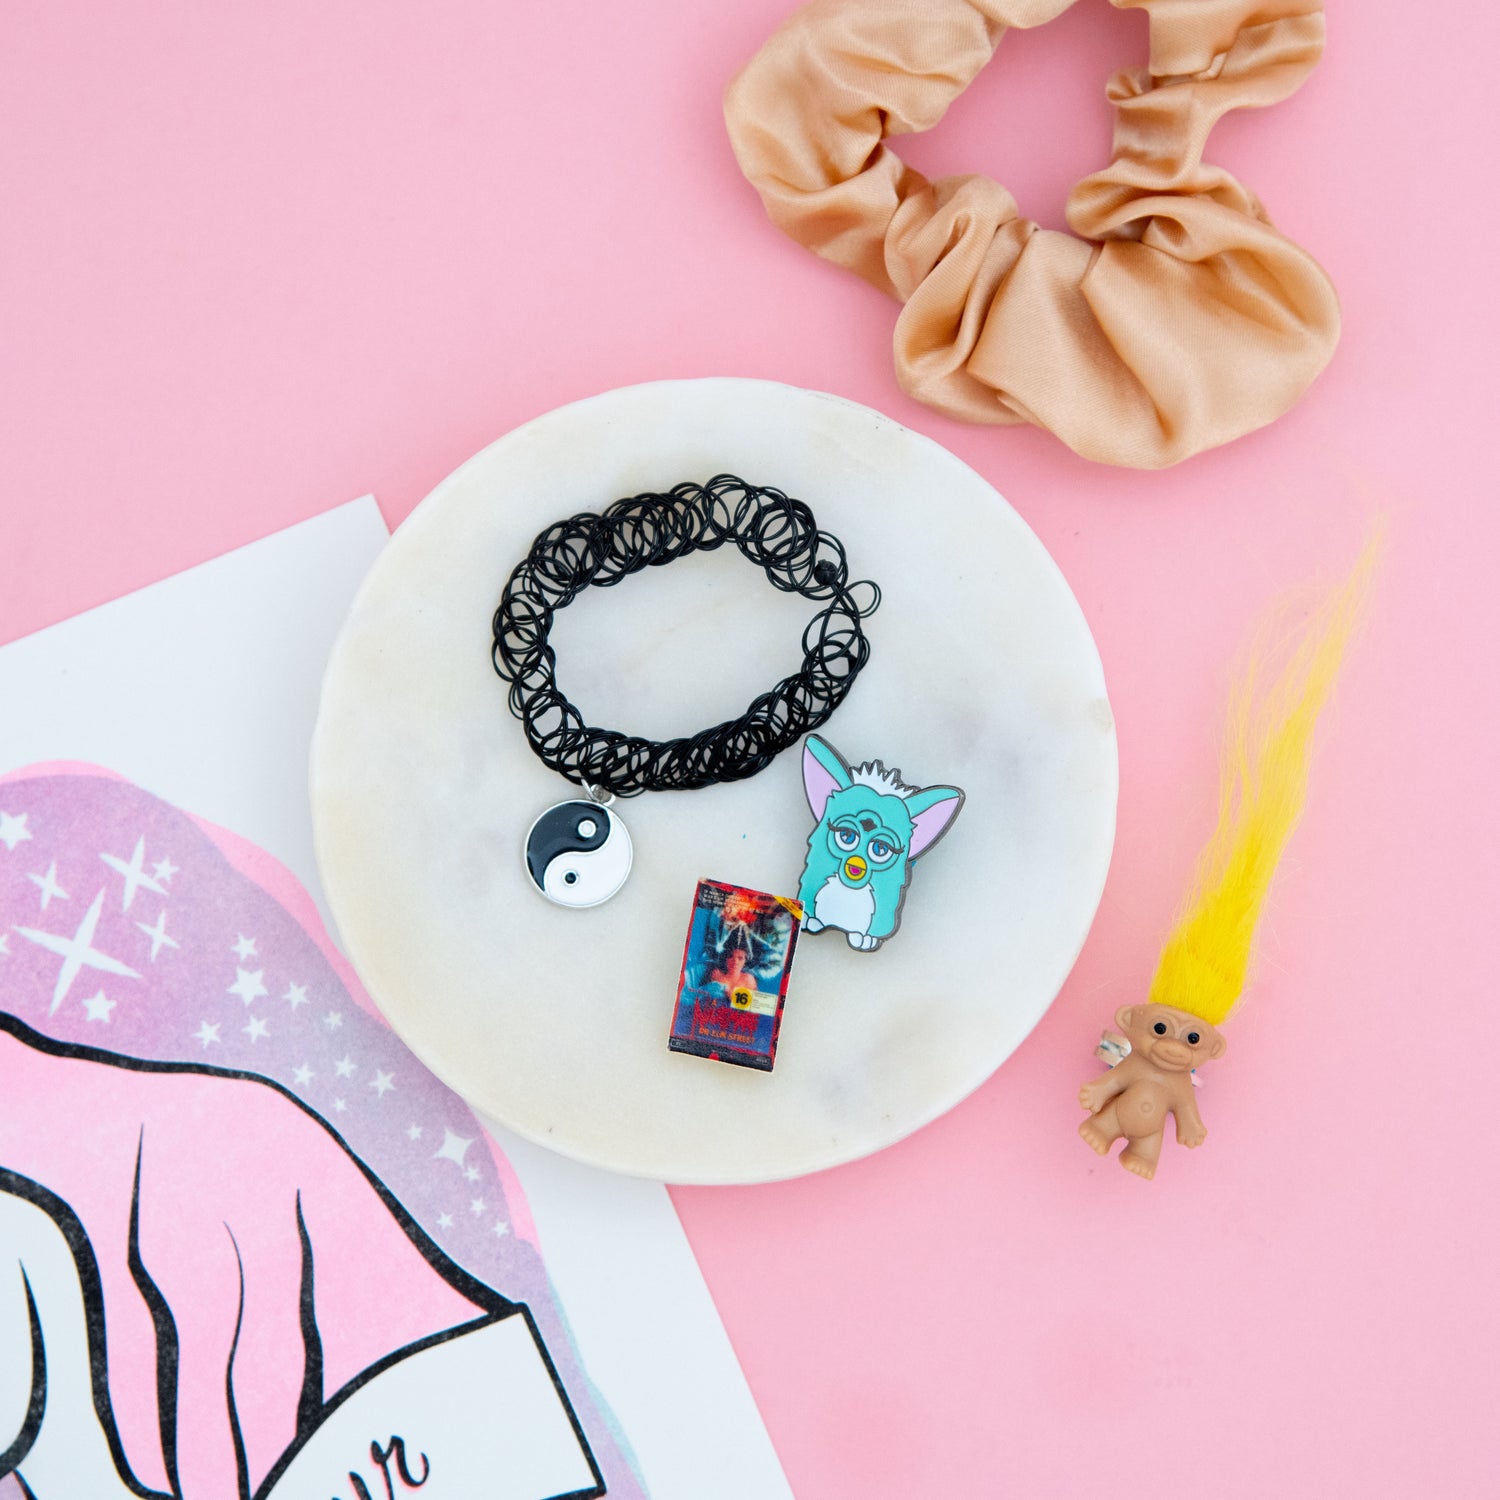 A blast from the past! Our 90s-themed subscription box includes a colorful Troll ring, stretchy Yin Yang necklace, Furby pin, Nightmare on Elm Street pin, and a trendy scrunchie to add to your hair accessory collection. Order now and enjoy the nostalgia!